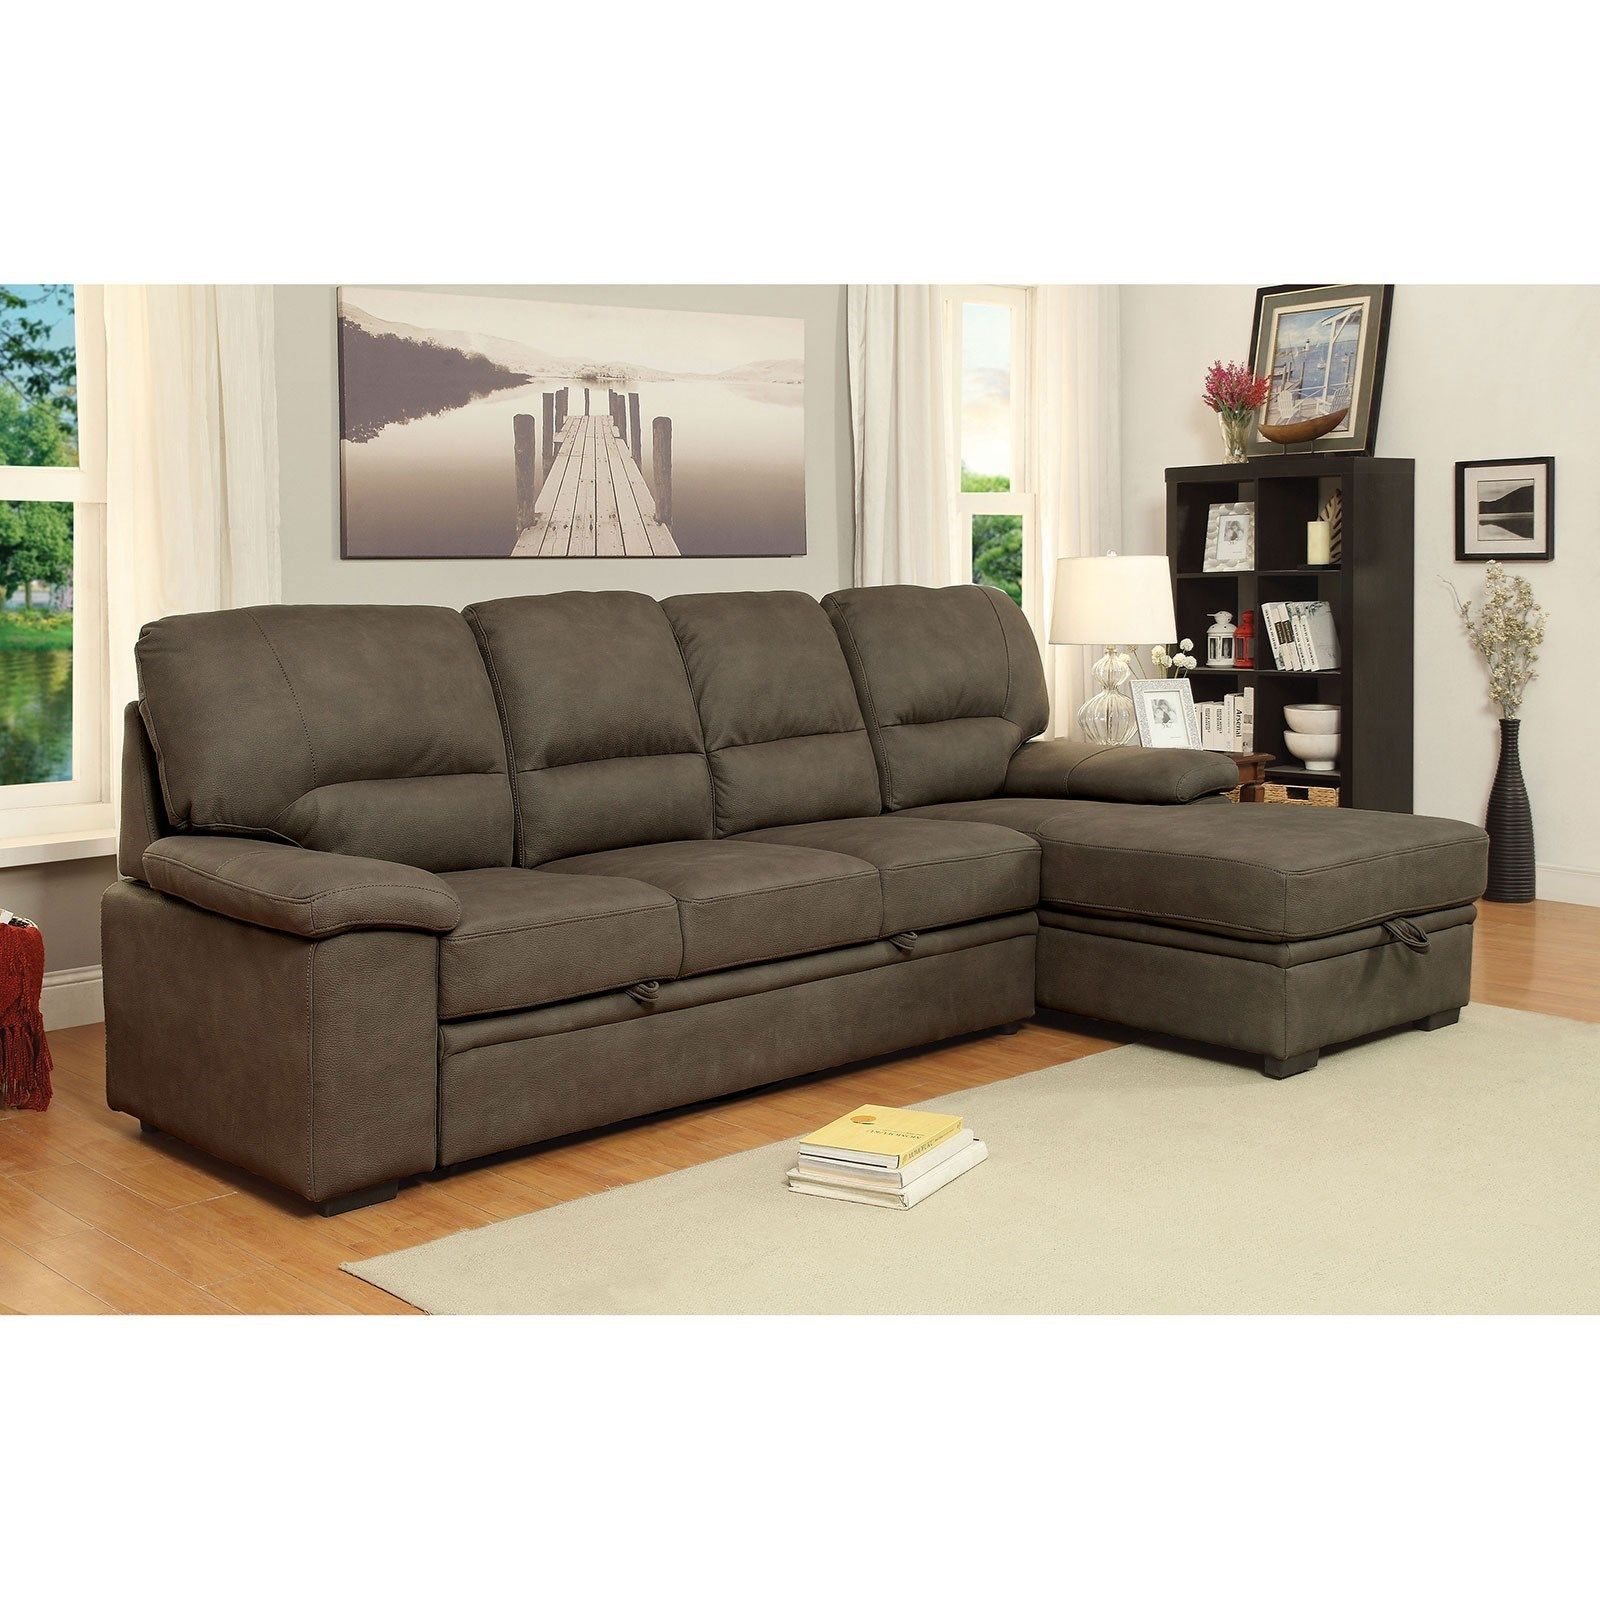 Furniture Of America Alcester 4 Seat Sectional Sofa With Sleeper And With Left Or Right Facing Sleeper Sectionals (Gallery 17 of 21)